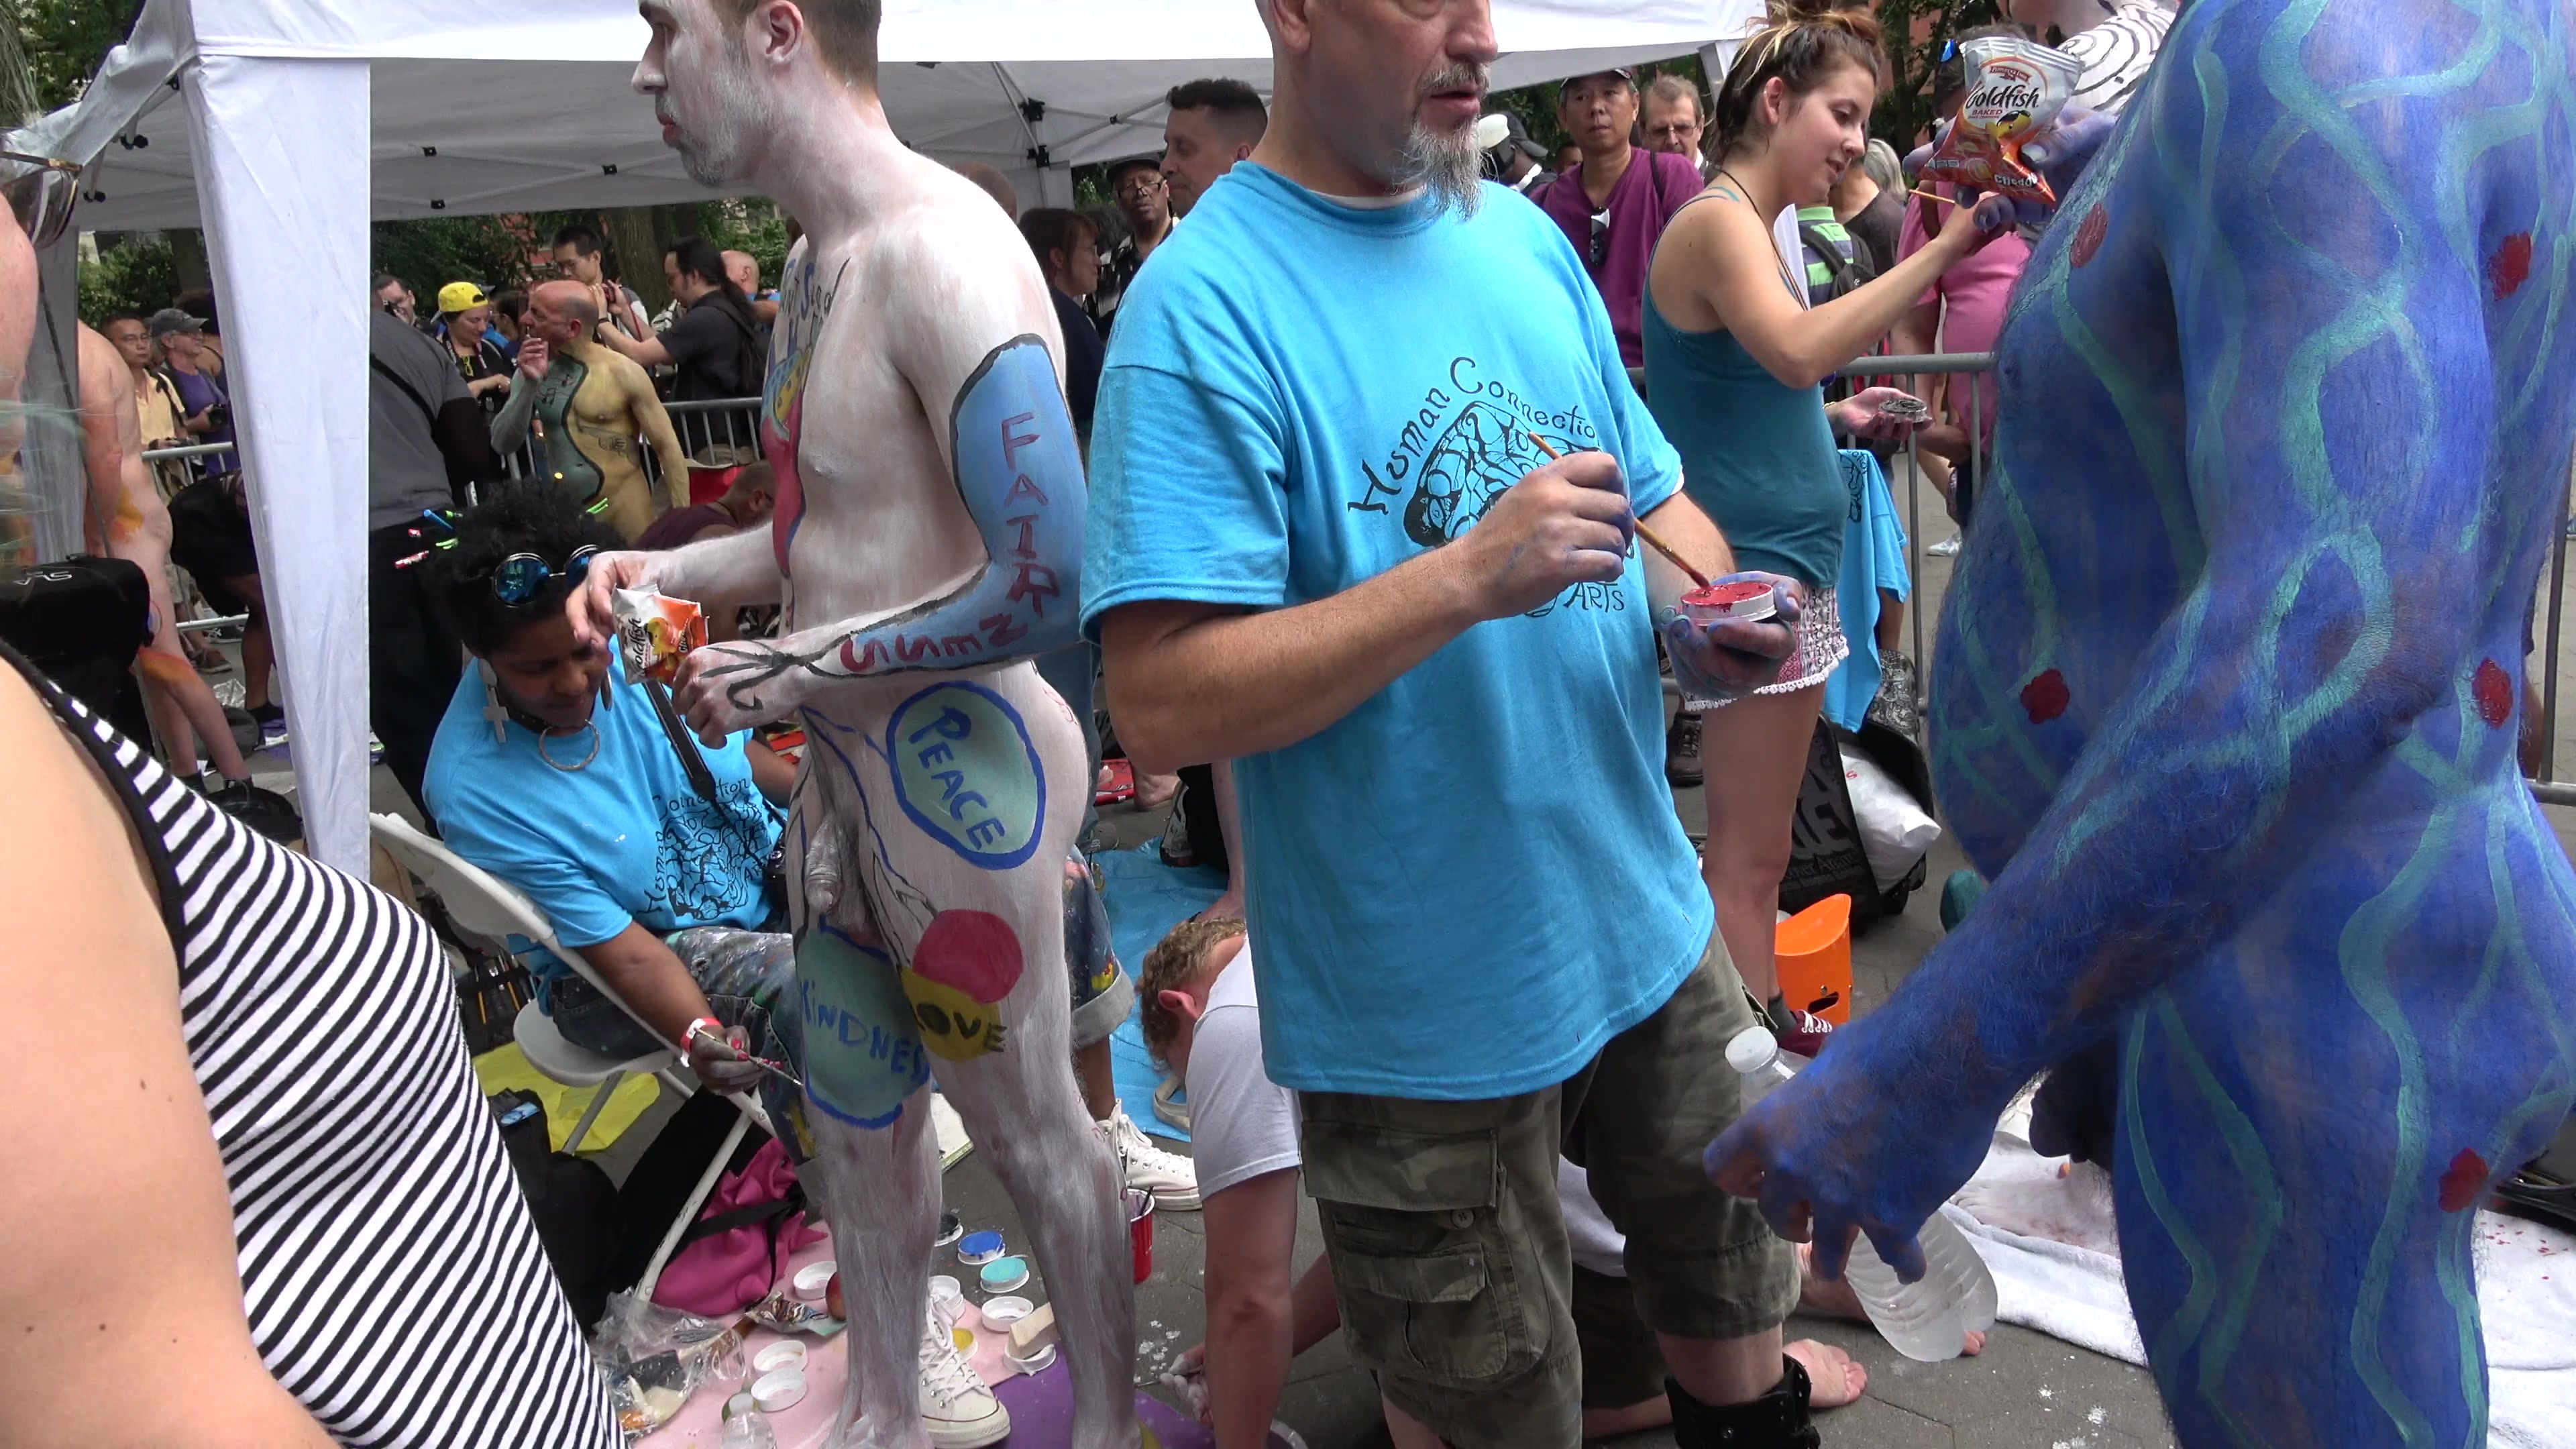 HOT BODY PAINTING IN THE CITY